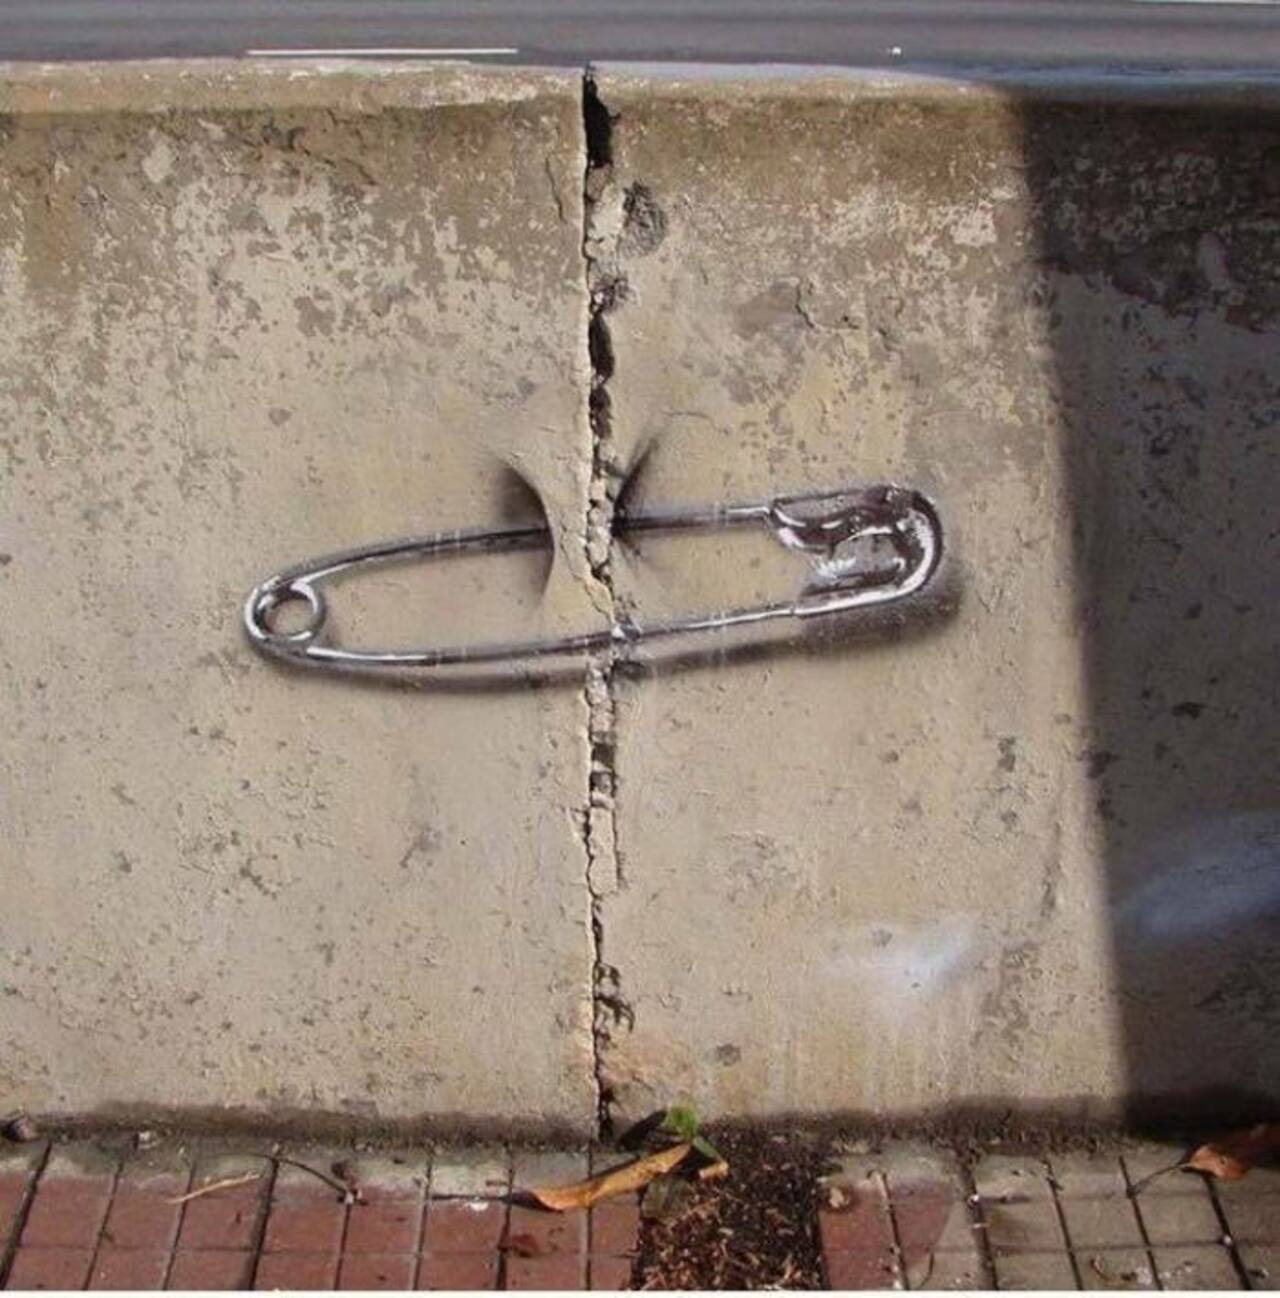 Simple & Beauty – #Creative #Streetart | Be ▲rtist - Be ▲rt https://beartistbeart.com/2016/08/25/simple-beauty-creative-streetart/?utm_campaign=crowdfire&utm_content=crowdfire&utm_medium=social&utm_source=twitter https://t.co/1BCgN4VxRC